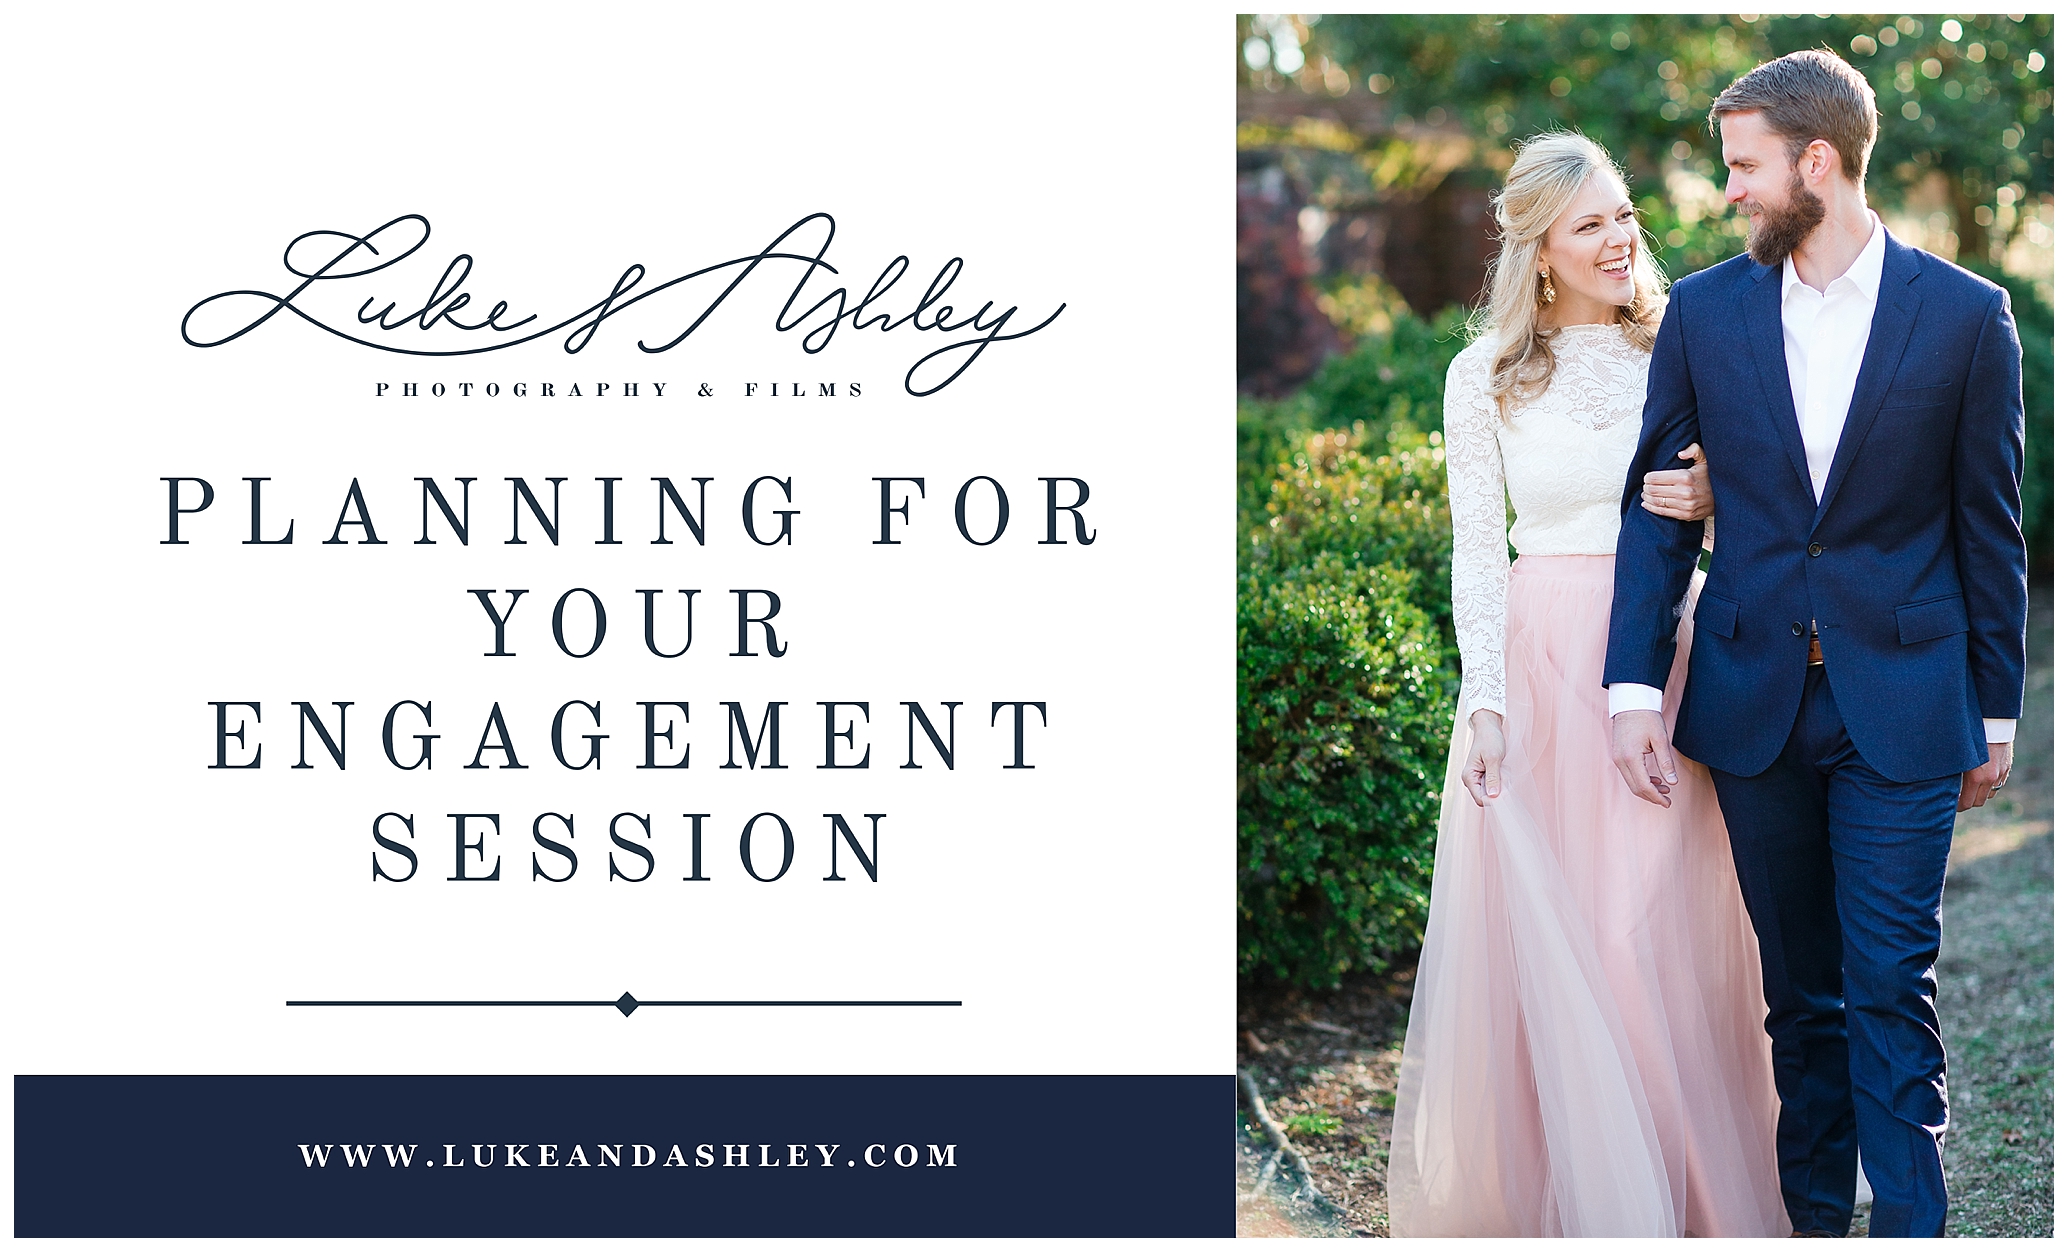 planning for your engagement photography session. We will walk you through on what to wear for your engagement session the best time of day and more. Luke and Ashley Photography